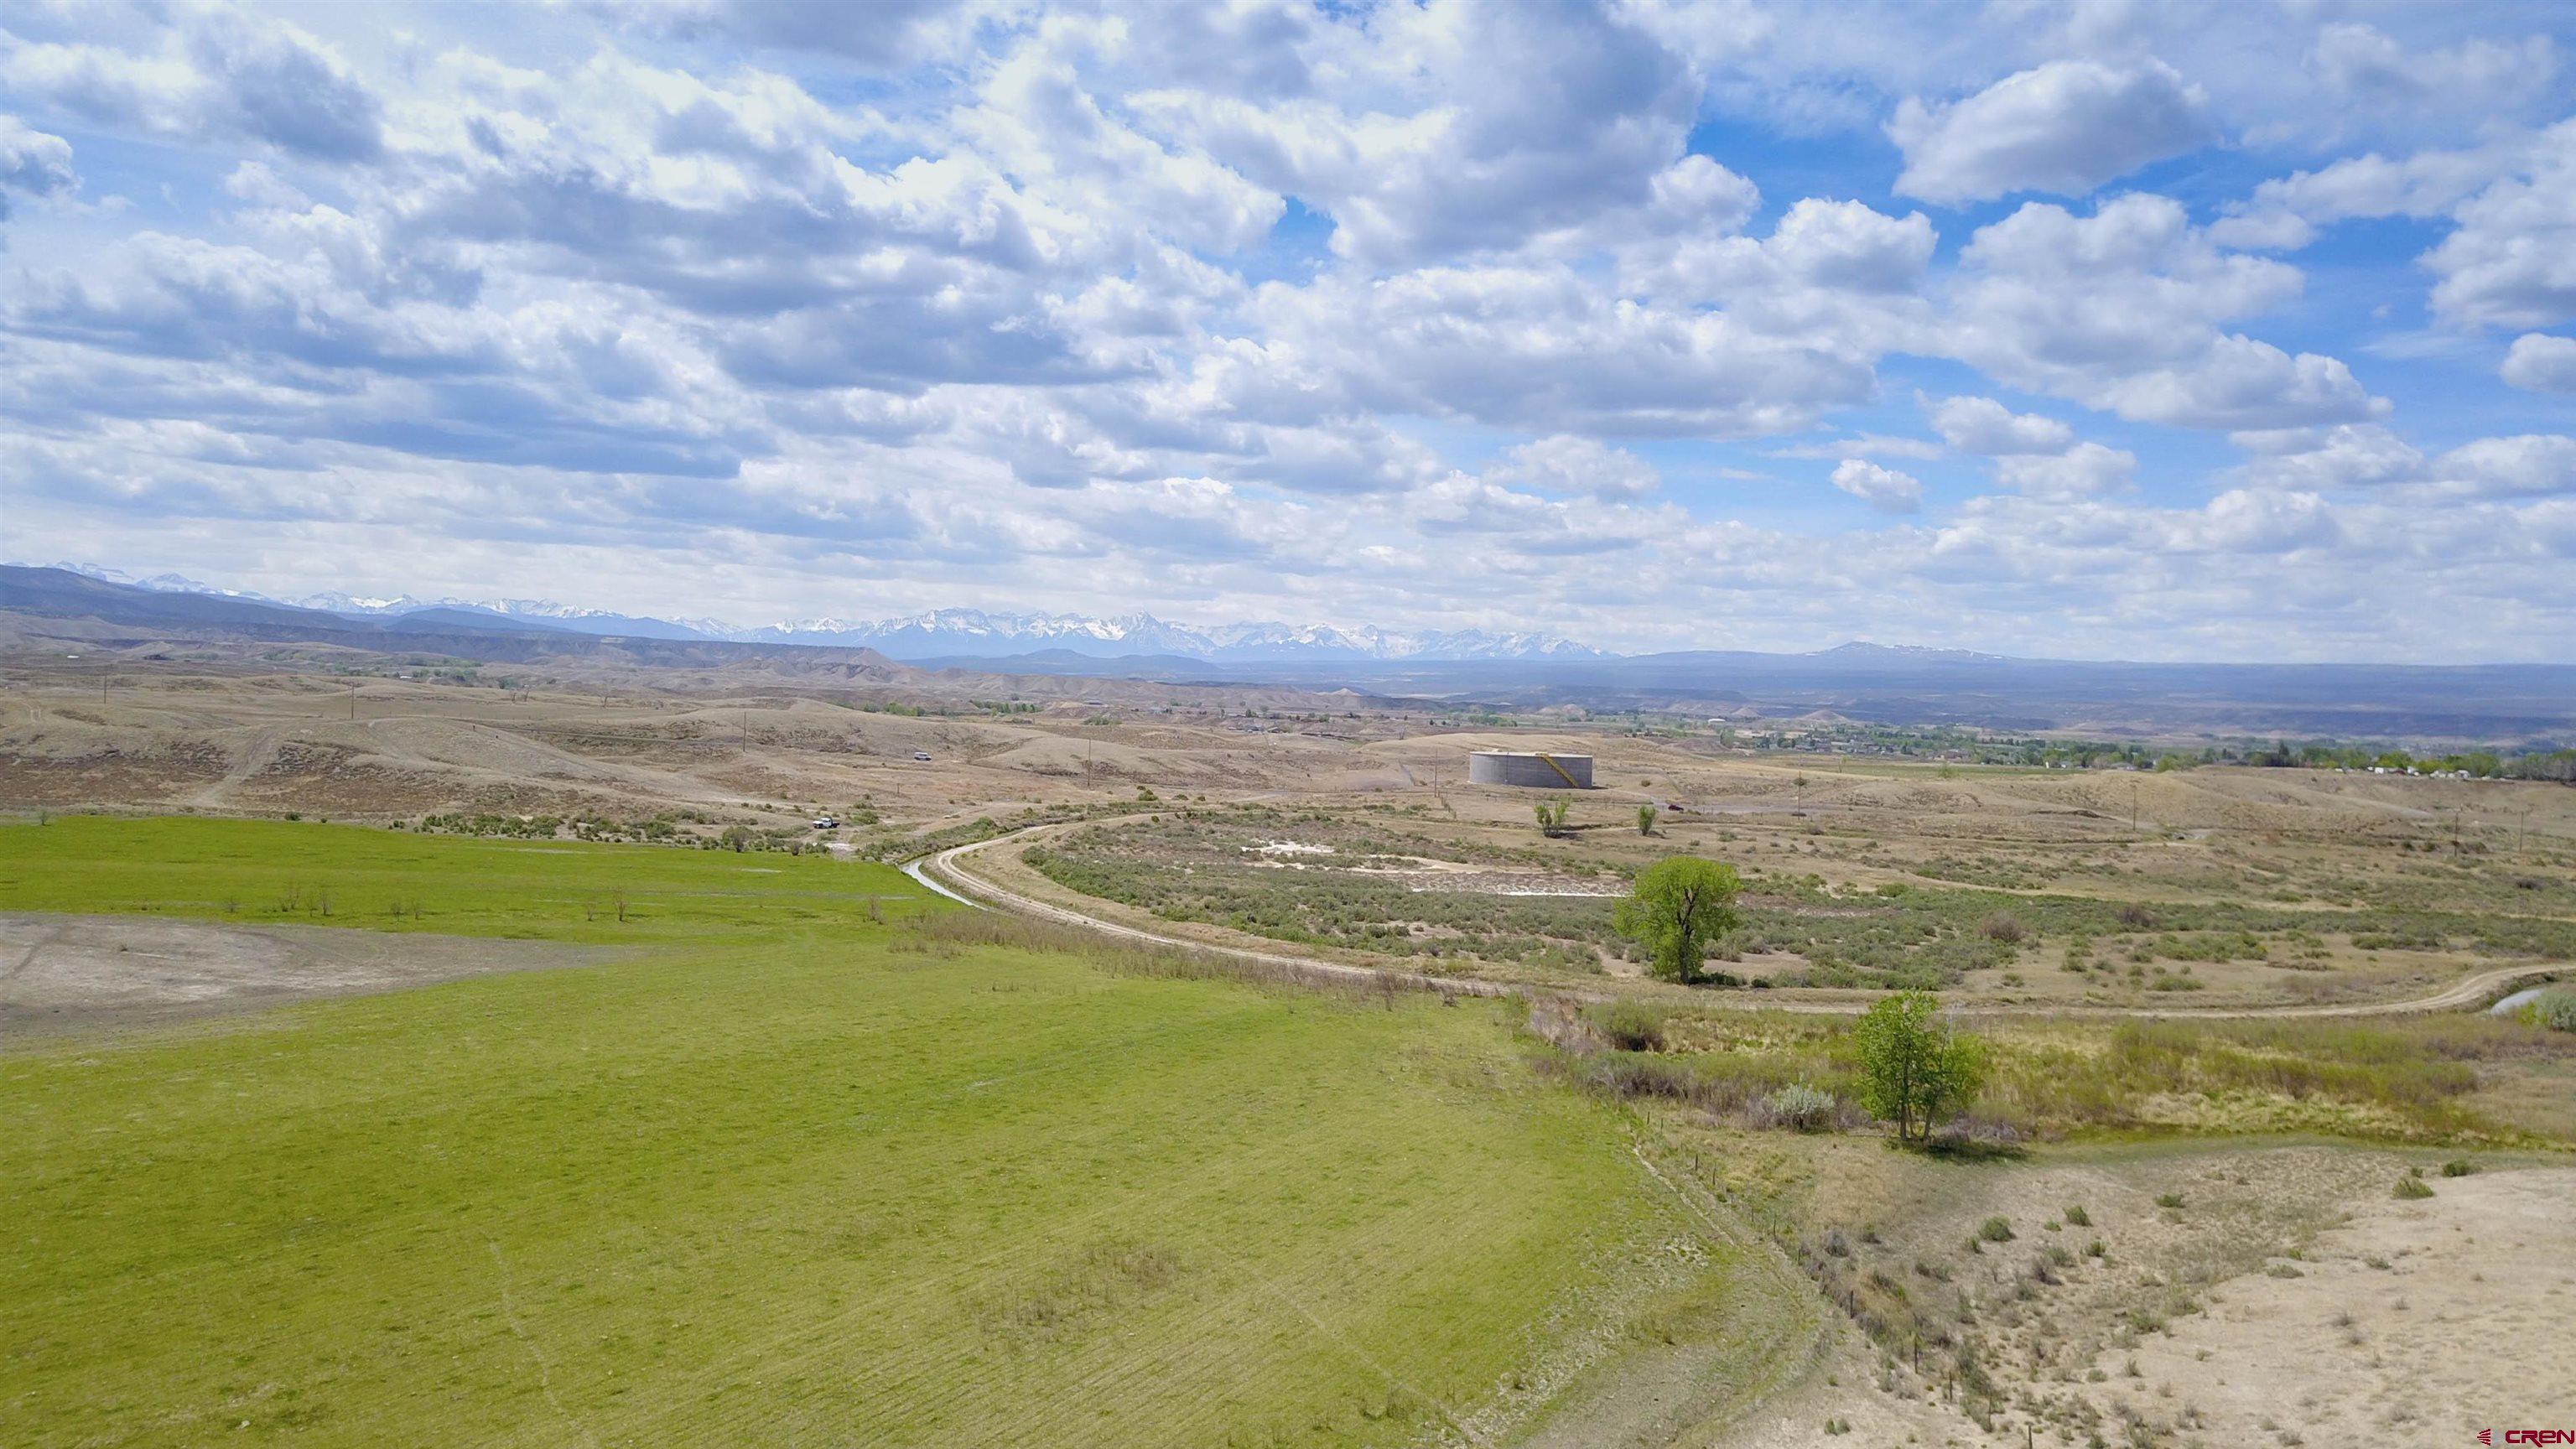 Development opportunity right in the City of Montrose! Tract 1 of Circle H Ranch offers 123 acres with 17.3 fully irrigated. Currently this beautiful acreage provides a home for livestock.  Some of the acreage is in hay and has been farmed for years. Are you looking for a gentleman’s farm/ranch not too far out in the country?  This is it. Alternatively, in the past, this property was platted and approved for a residential subdivision as well as 10 full acres of B4 commercial zoning.  Any new developer will need to repeat the process but it’s a great chance to add your permanent stamp to the City of Montrose.  This Tract 1 includes ag land which had been approved for R1A zoning – i.e. one home per every half acre – these homes would each have spectacular views.  Installed city sewer line is included, $96,000 paid toward sewer taps and the entire property can access sewer – no septic required.  Tri-County Water taps are available and all utilities are to the property line.  You will NOT find a better opportunity in the future.  Montrose is growing and expanding and this is great time to start your development!  This versatile property has options – contact me today for all the info!!